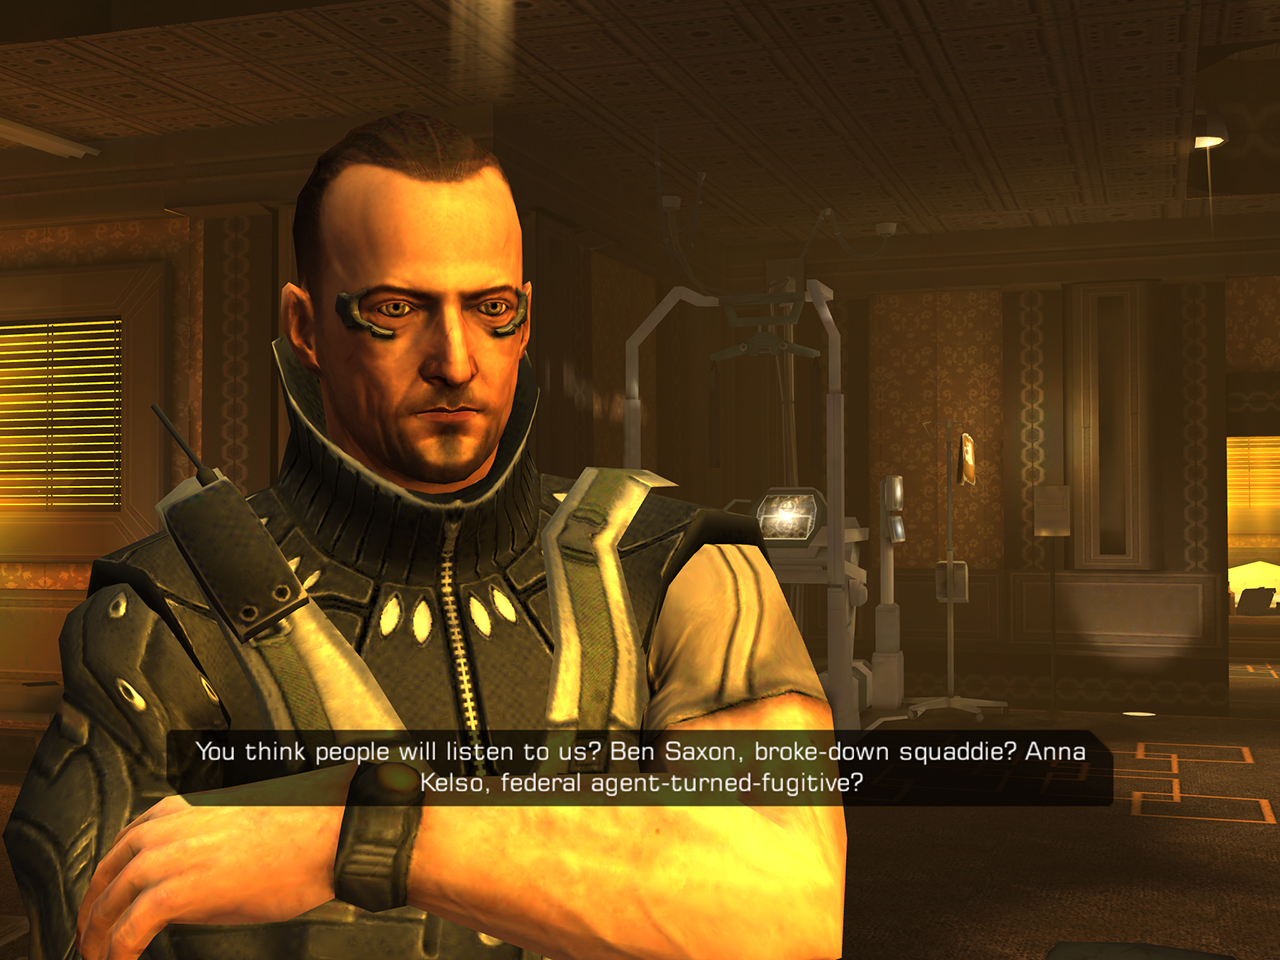 App Review: Sorry Console/PC Gamers, But The Mobile Deus Ex Is Damn Good